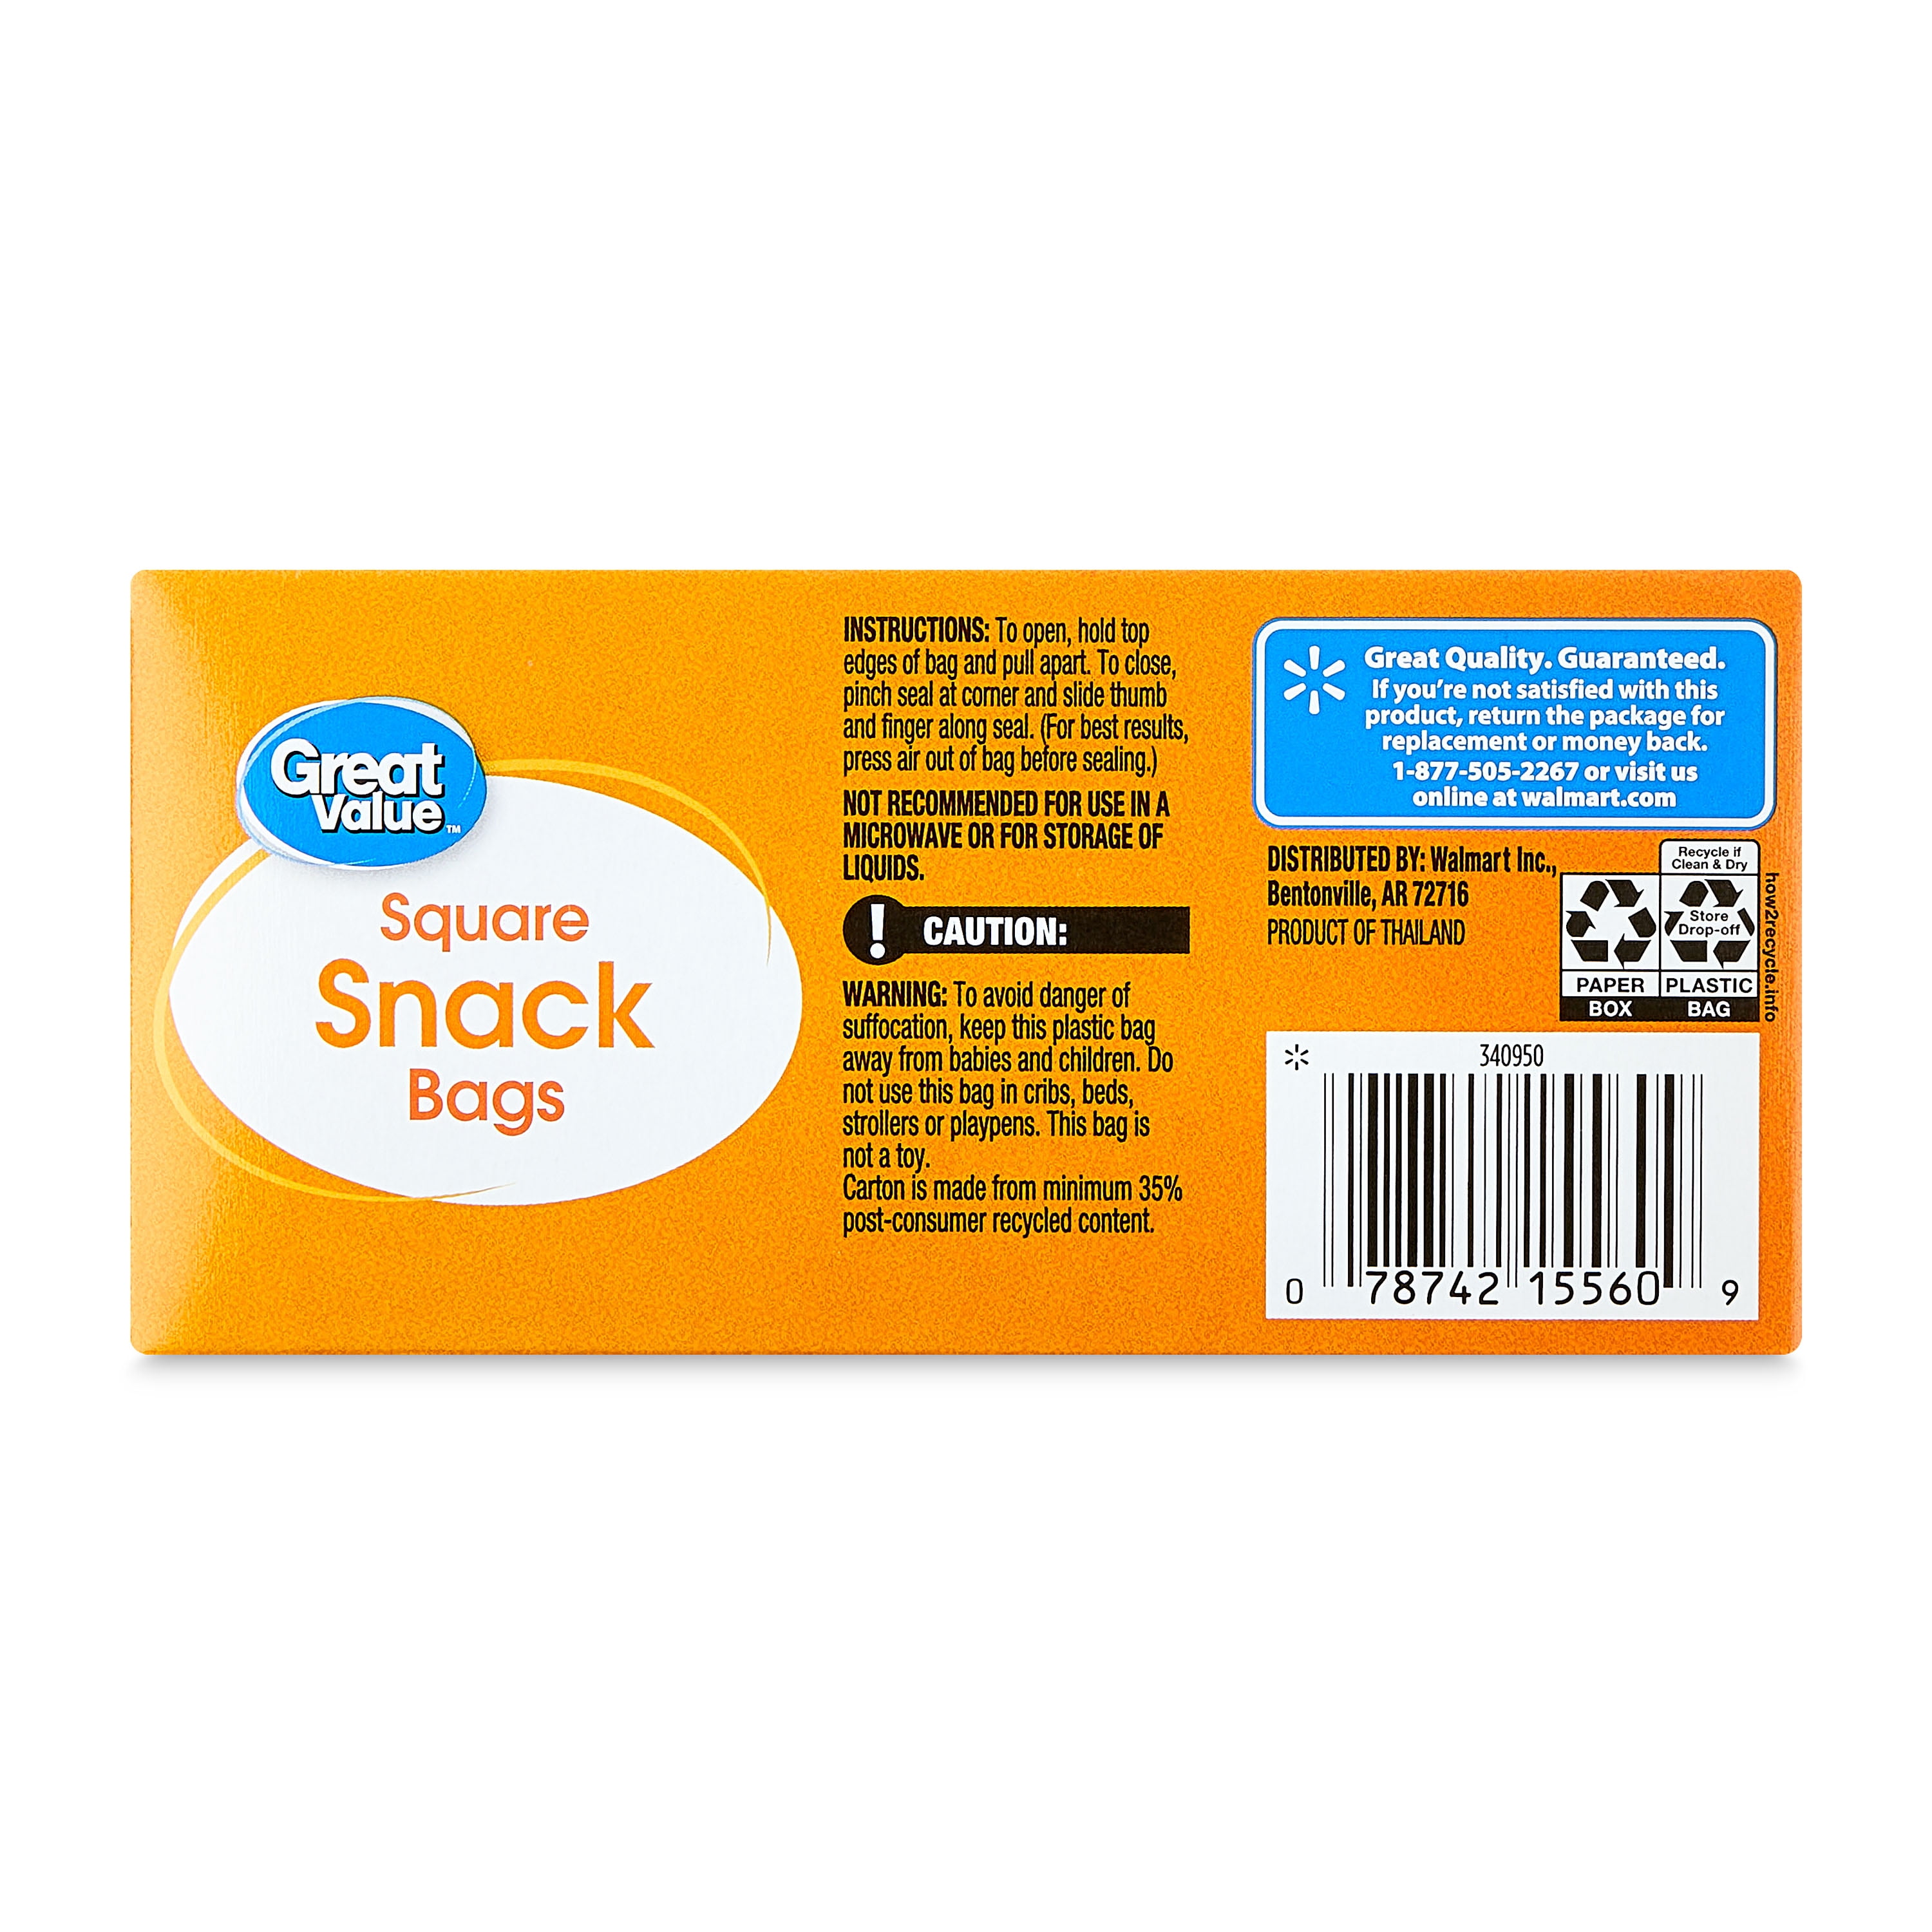 Meijer Square Snack Bags, 100 Count